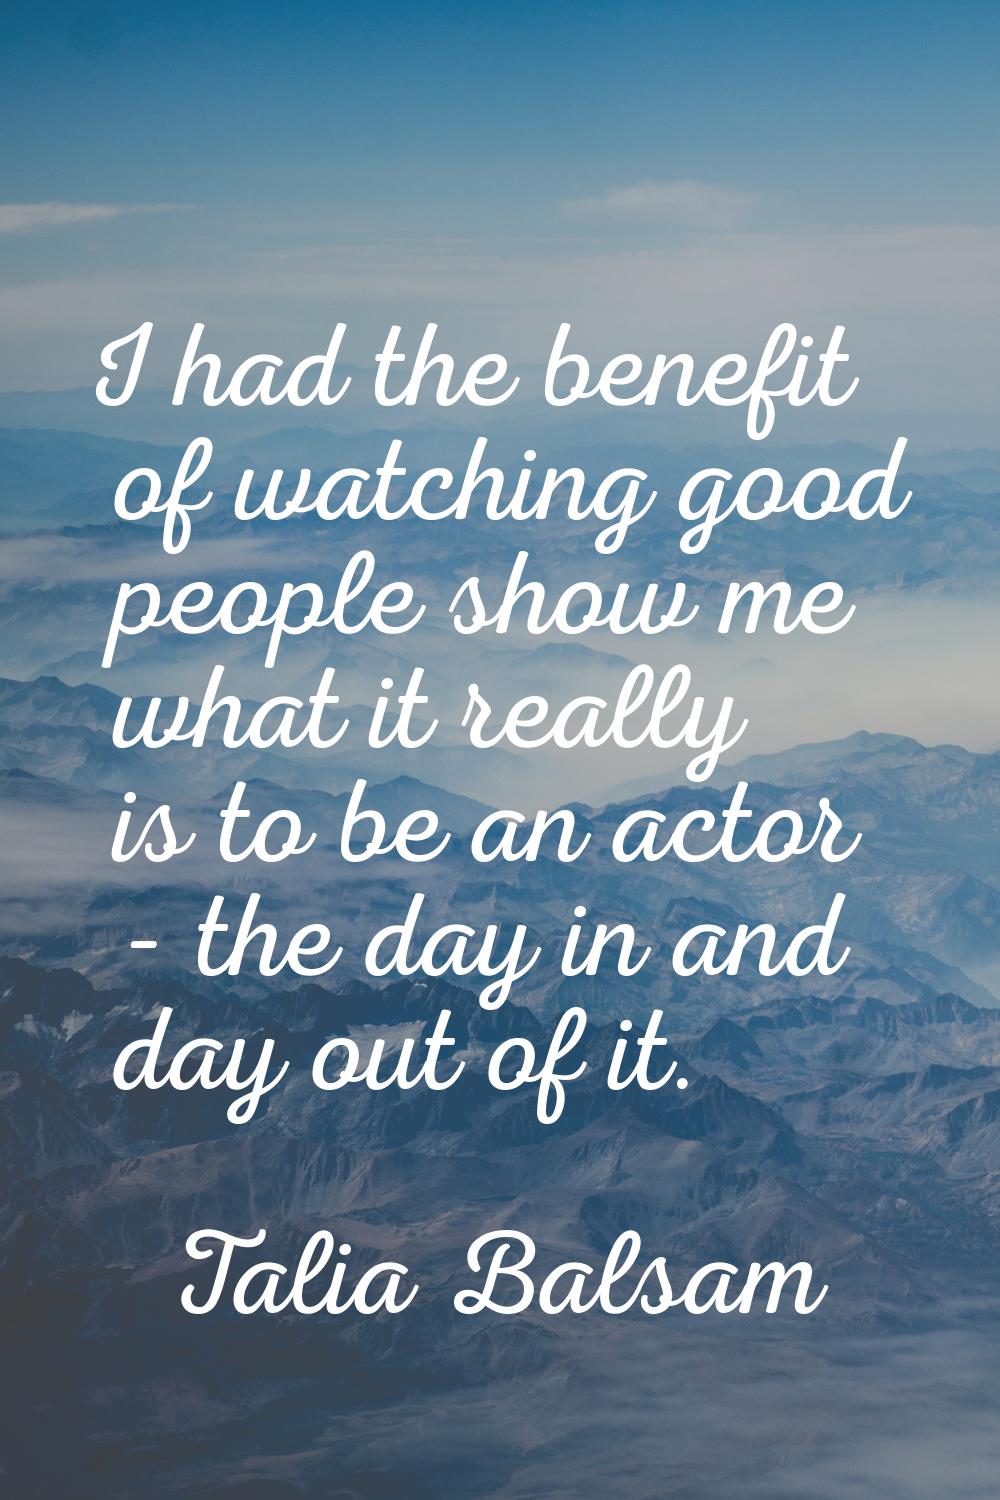 I had the benefit of watching good people show me what it really is to be an actor - the day in and